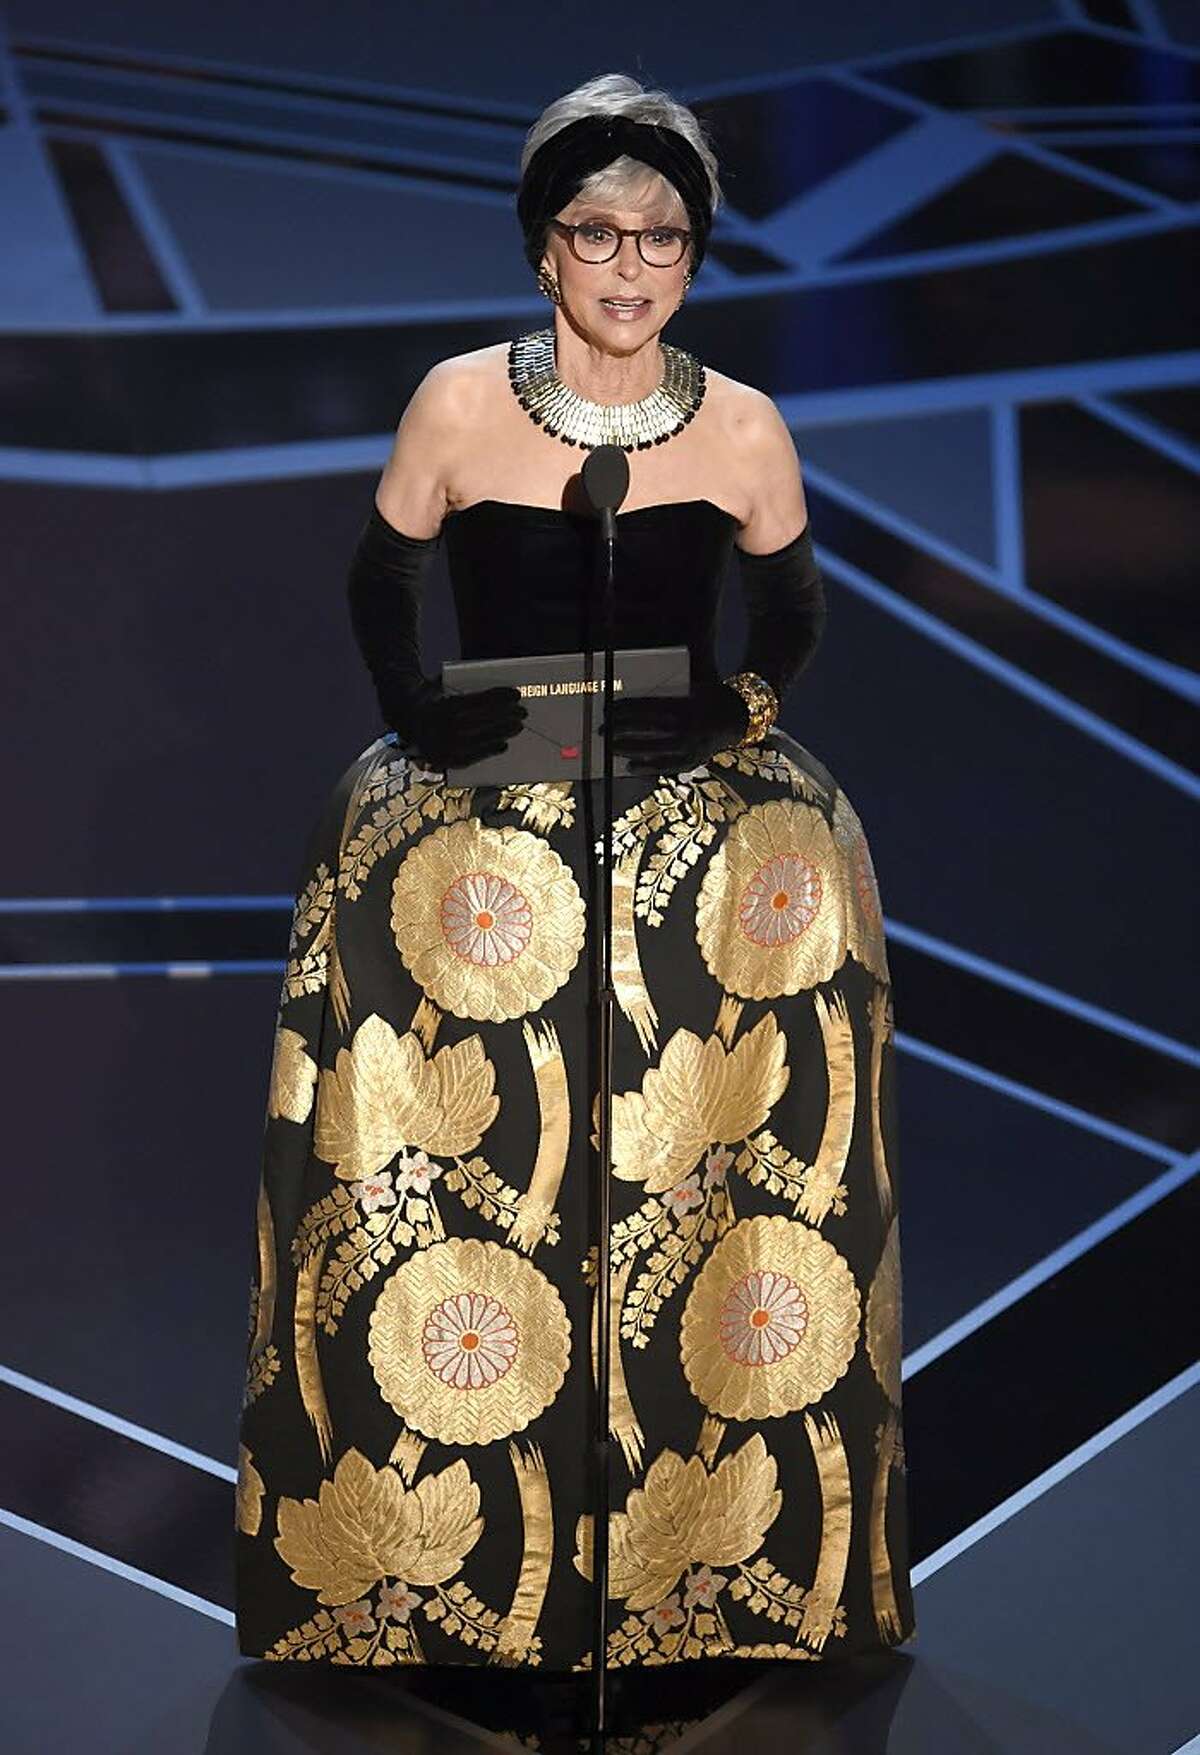 Rita Moreno presents the award for best foreign language film at the Oscars on Sunday, March 4, 2018, at the Dolby Theatre in Los Angeles. (Photo by Chris Pizzello/Invision/AP)